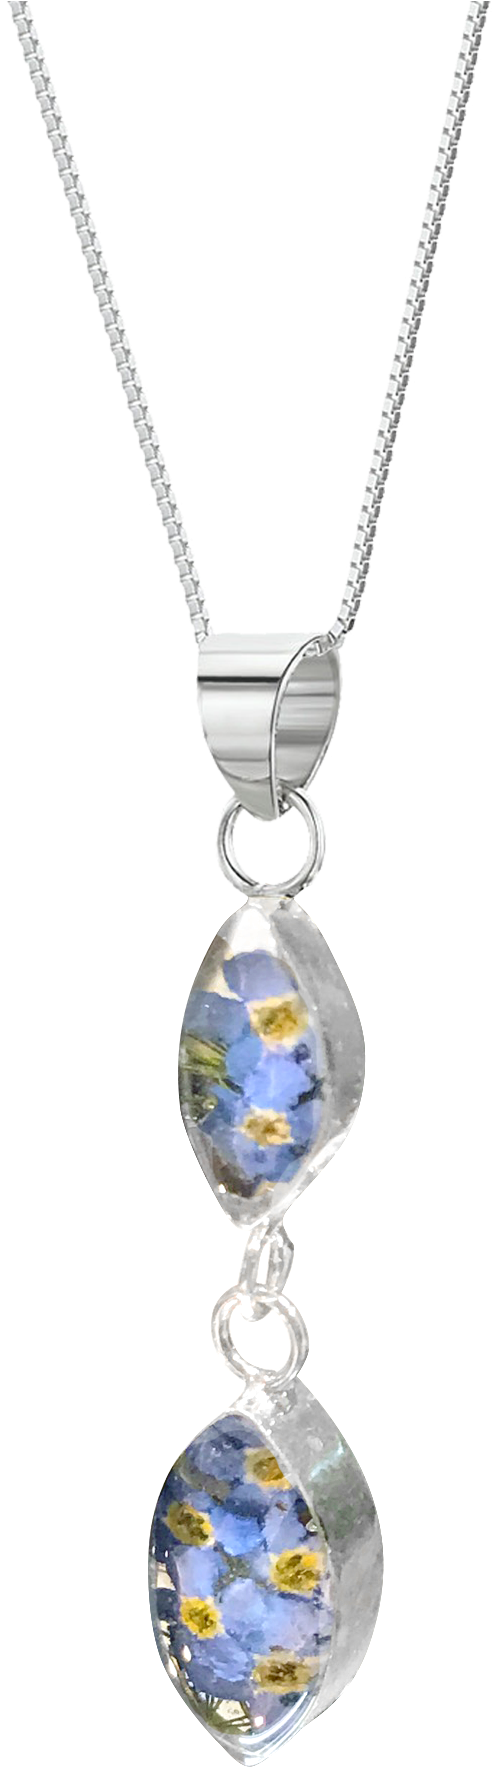 Forget Me Not Necklace Double Oval Sterling Silver - Moon Necklace Rosebud Sterling Silver Real Flower Pendant (1128x1864)